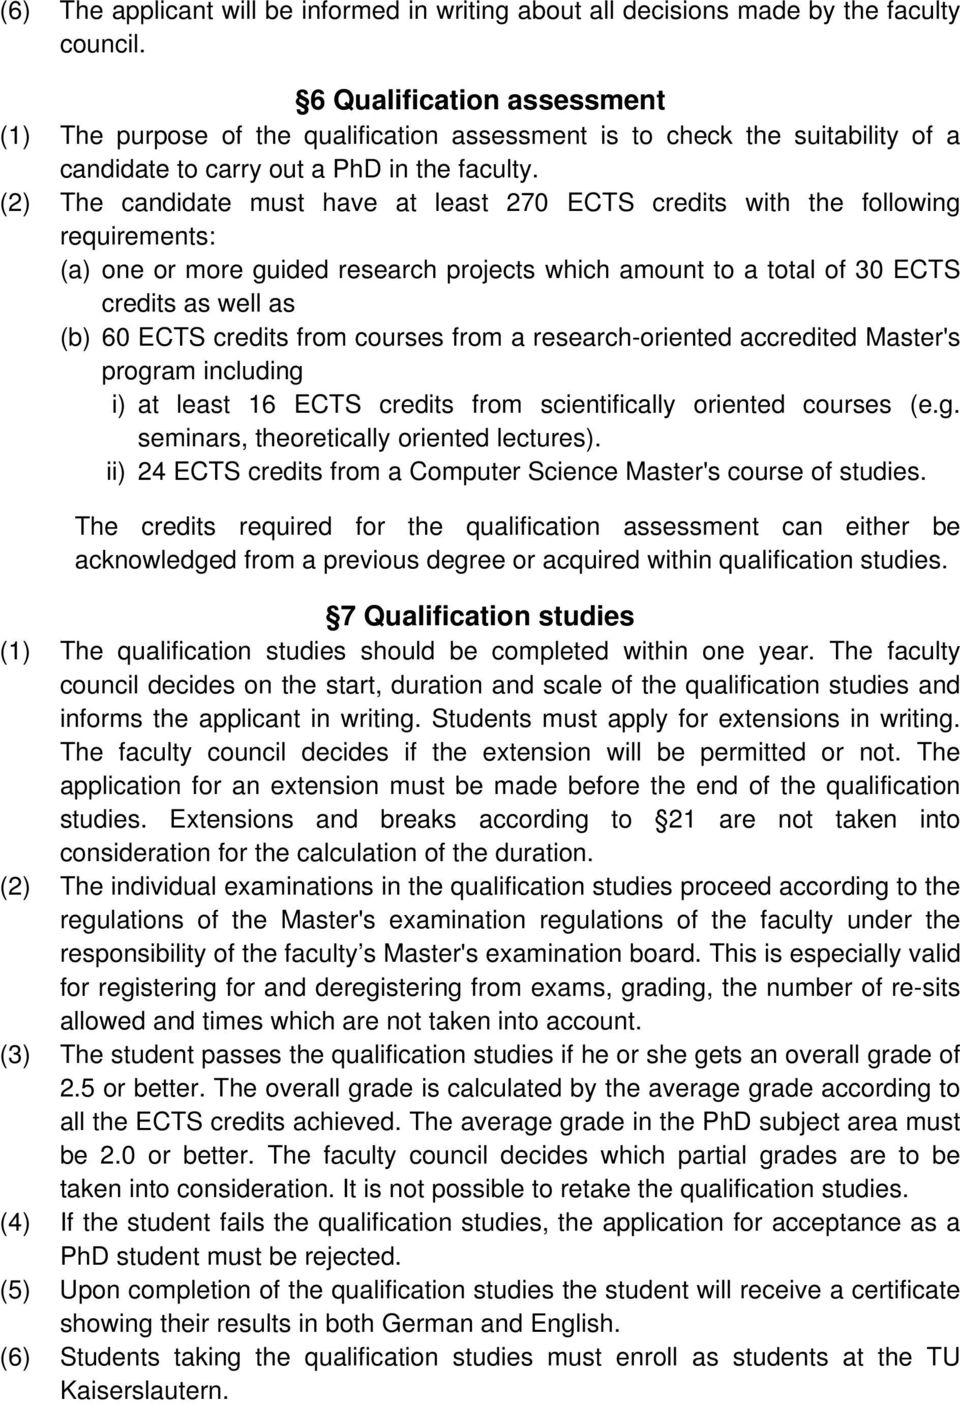 (2) The candidate must have at least 270 ECTS credits with the following requirements: (a) one or more guided research projects which amount to a total of 30 ECTS credits as well as (b) 60 ECTS